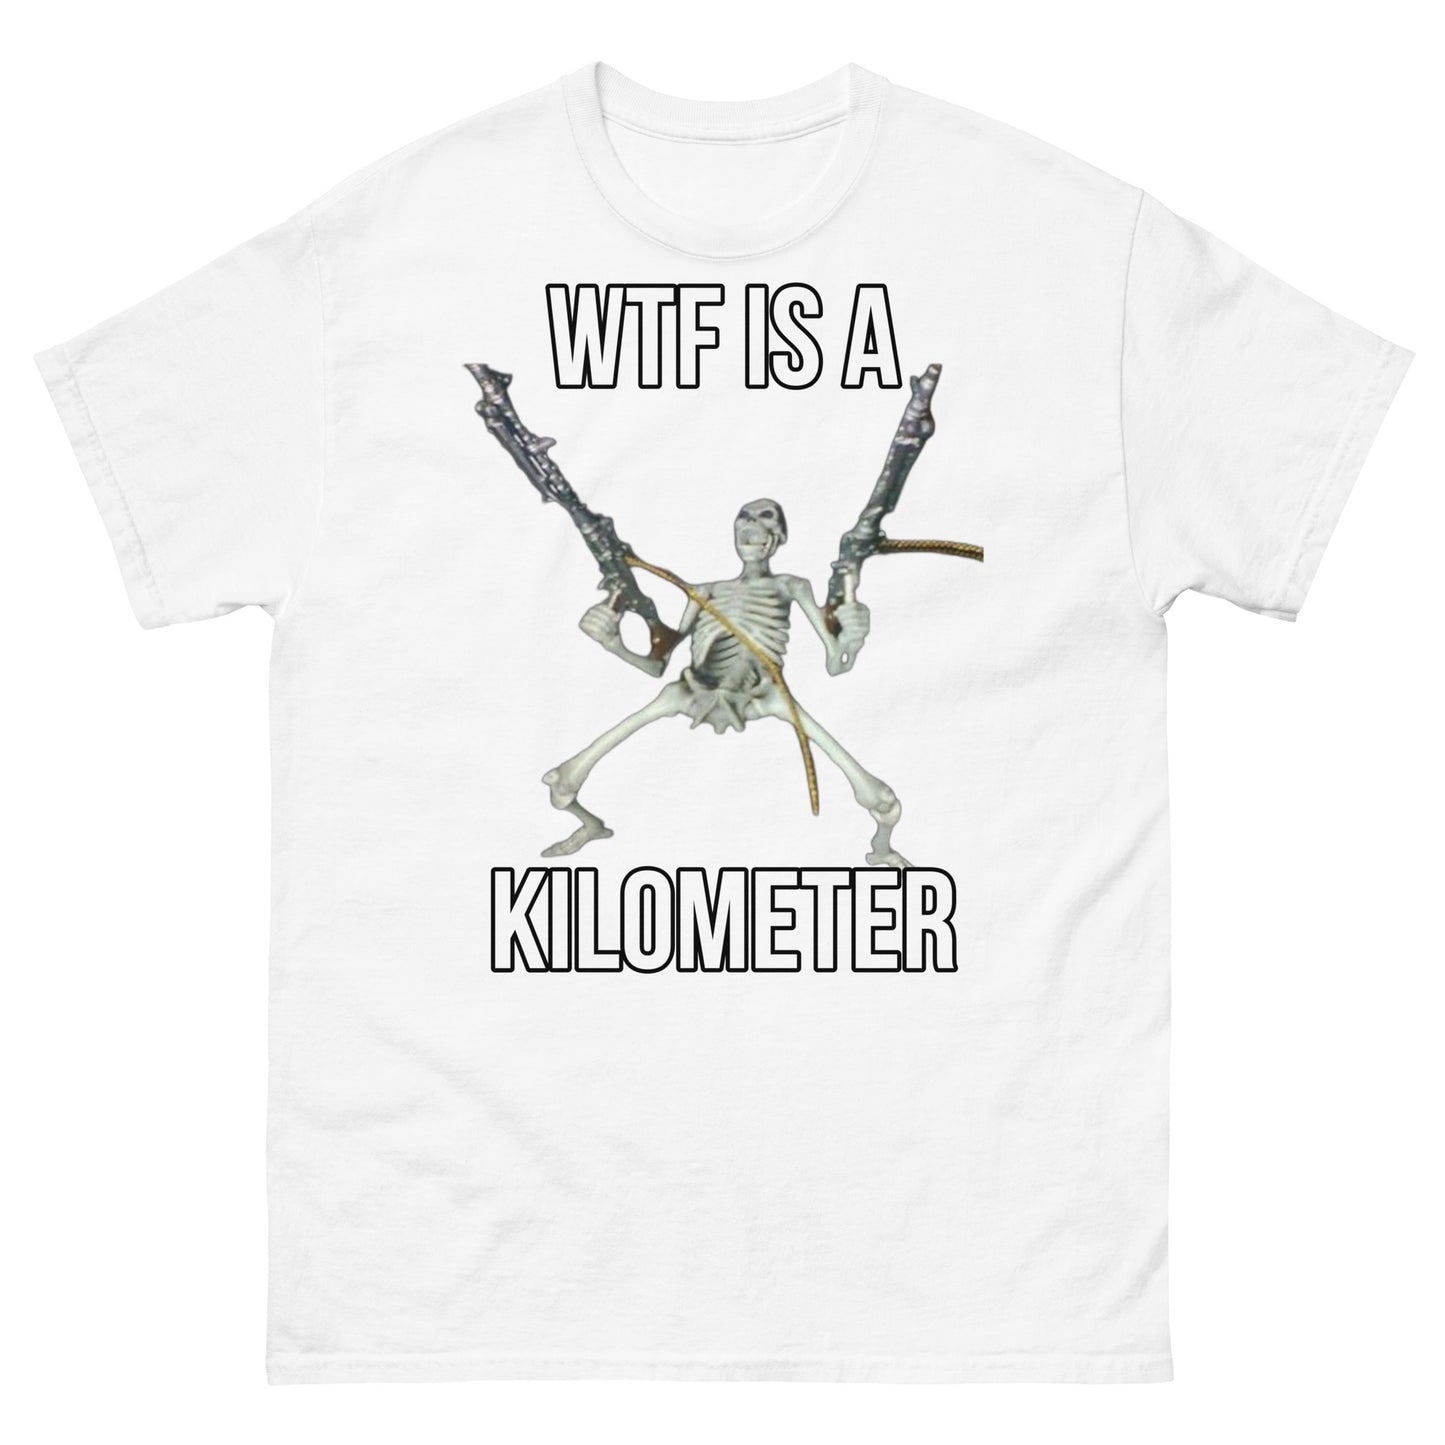 WTF is a kilometer WITHOUT FLAG